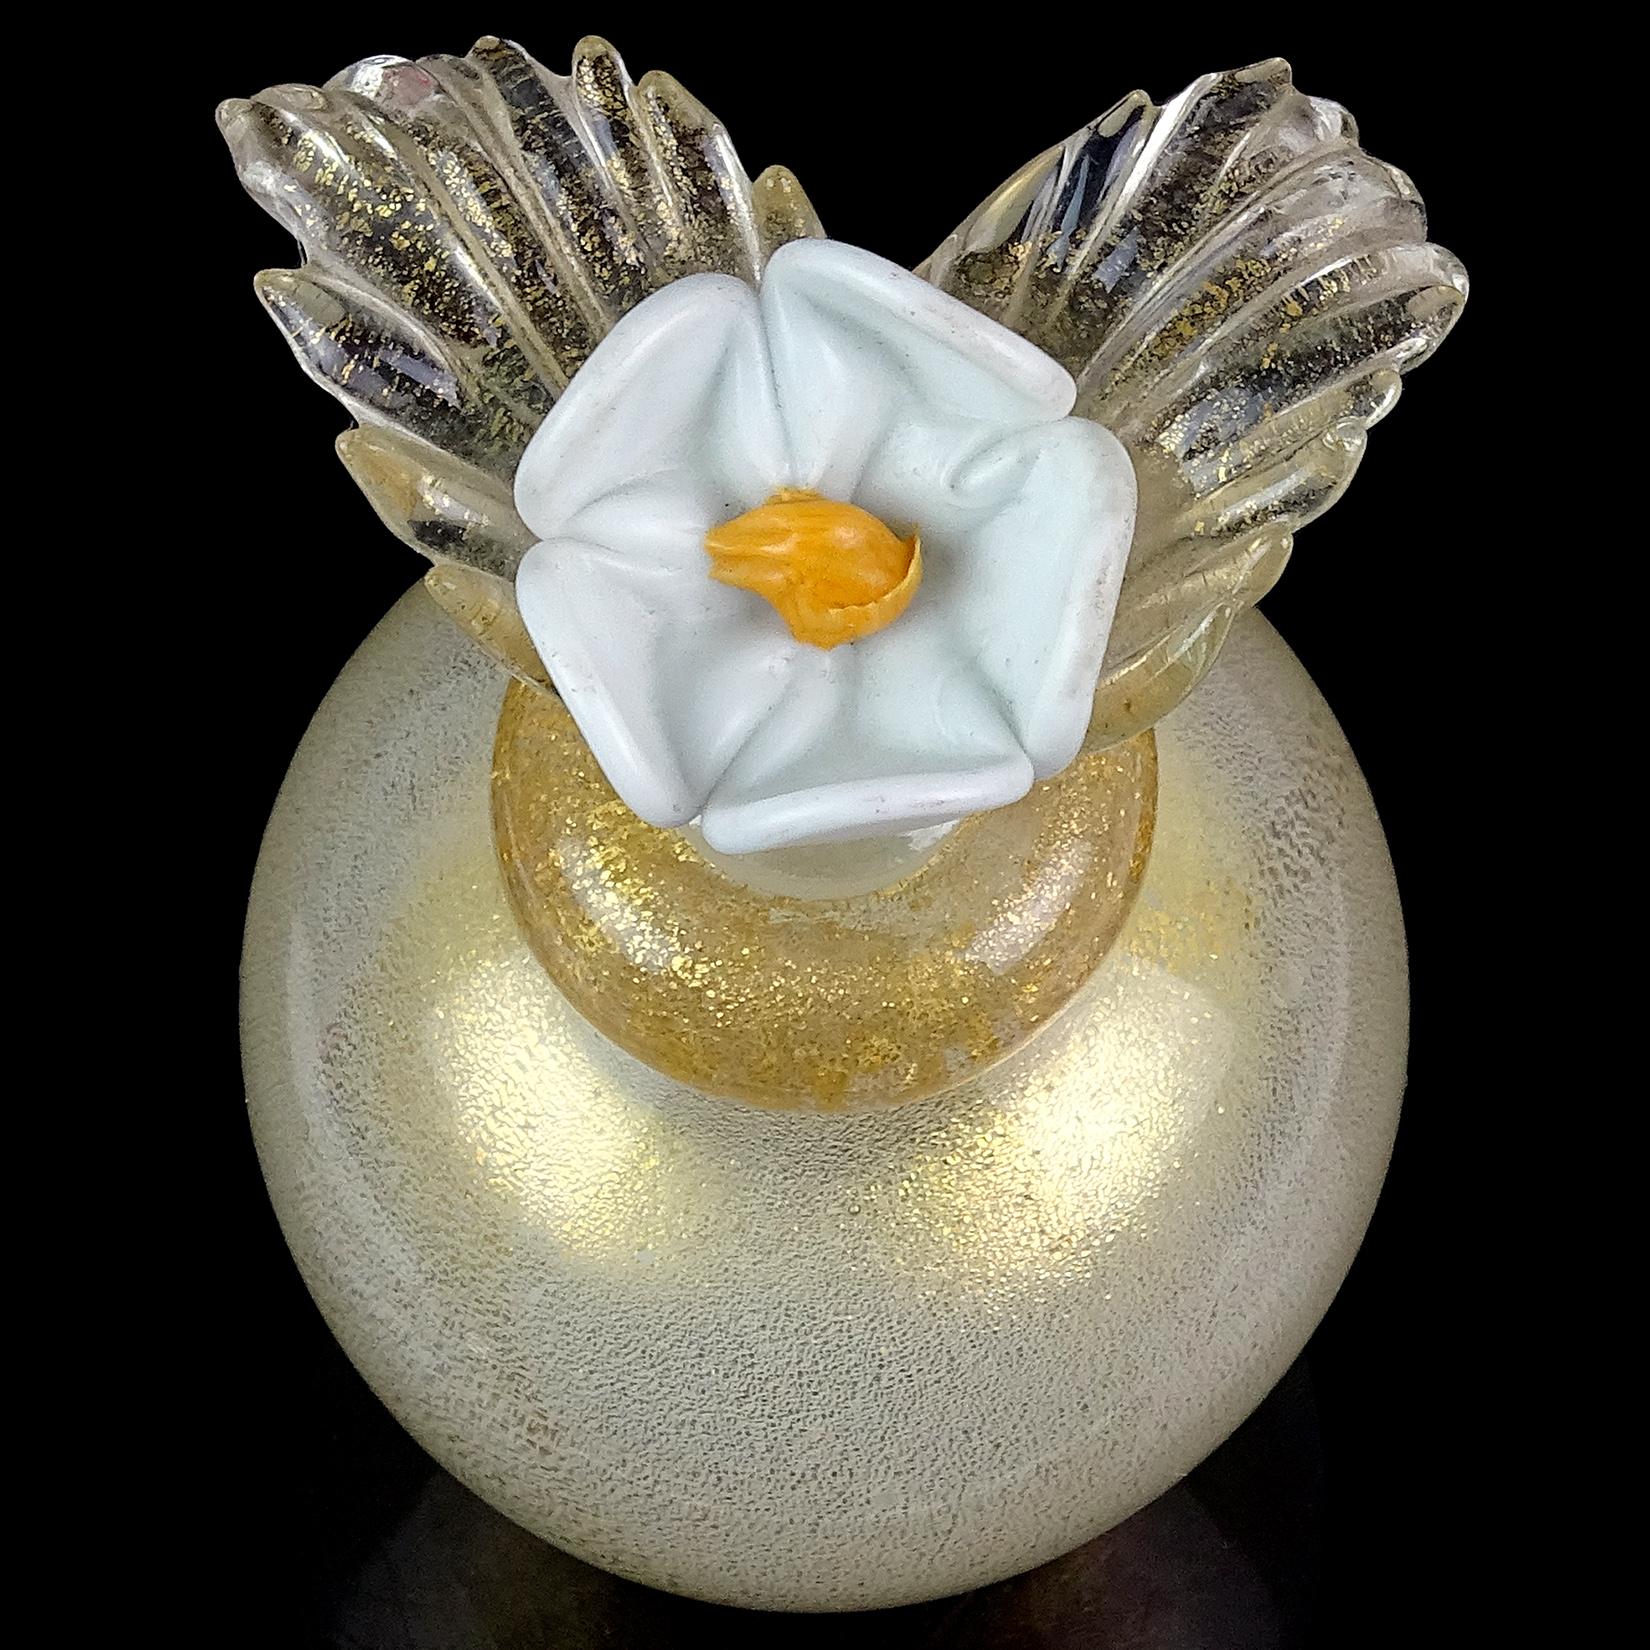 perfume bottle with flower on top